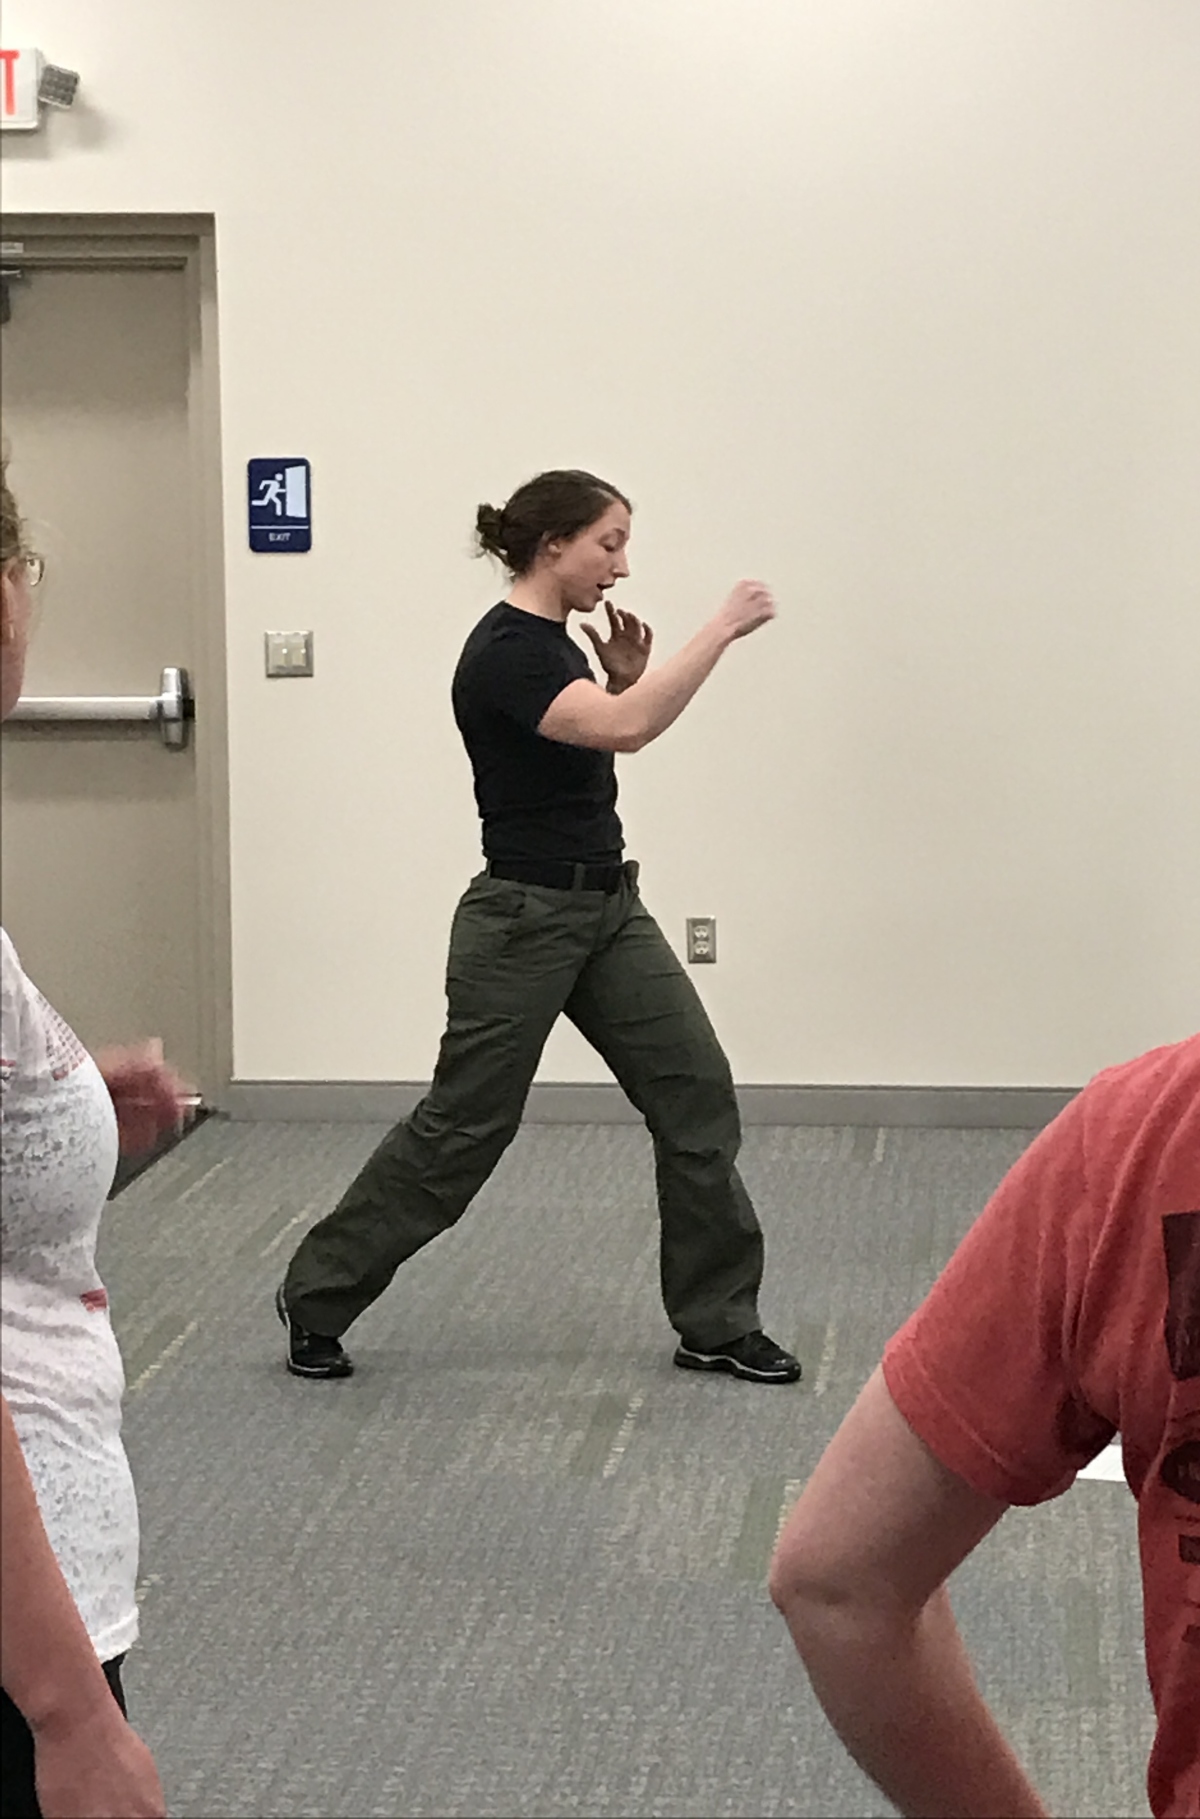 Ritter conducting self defense course